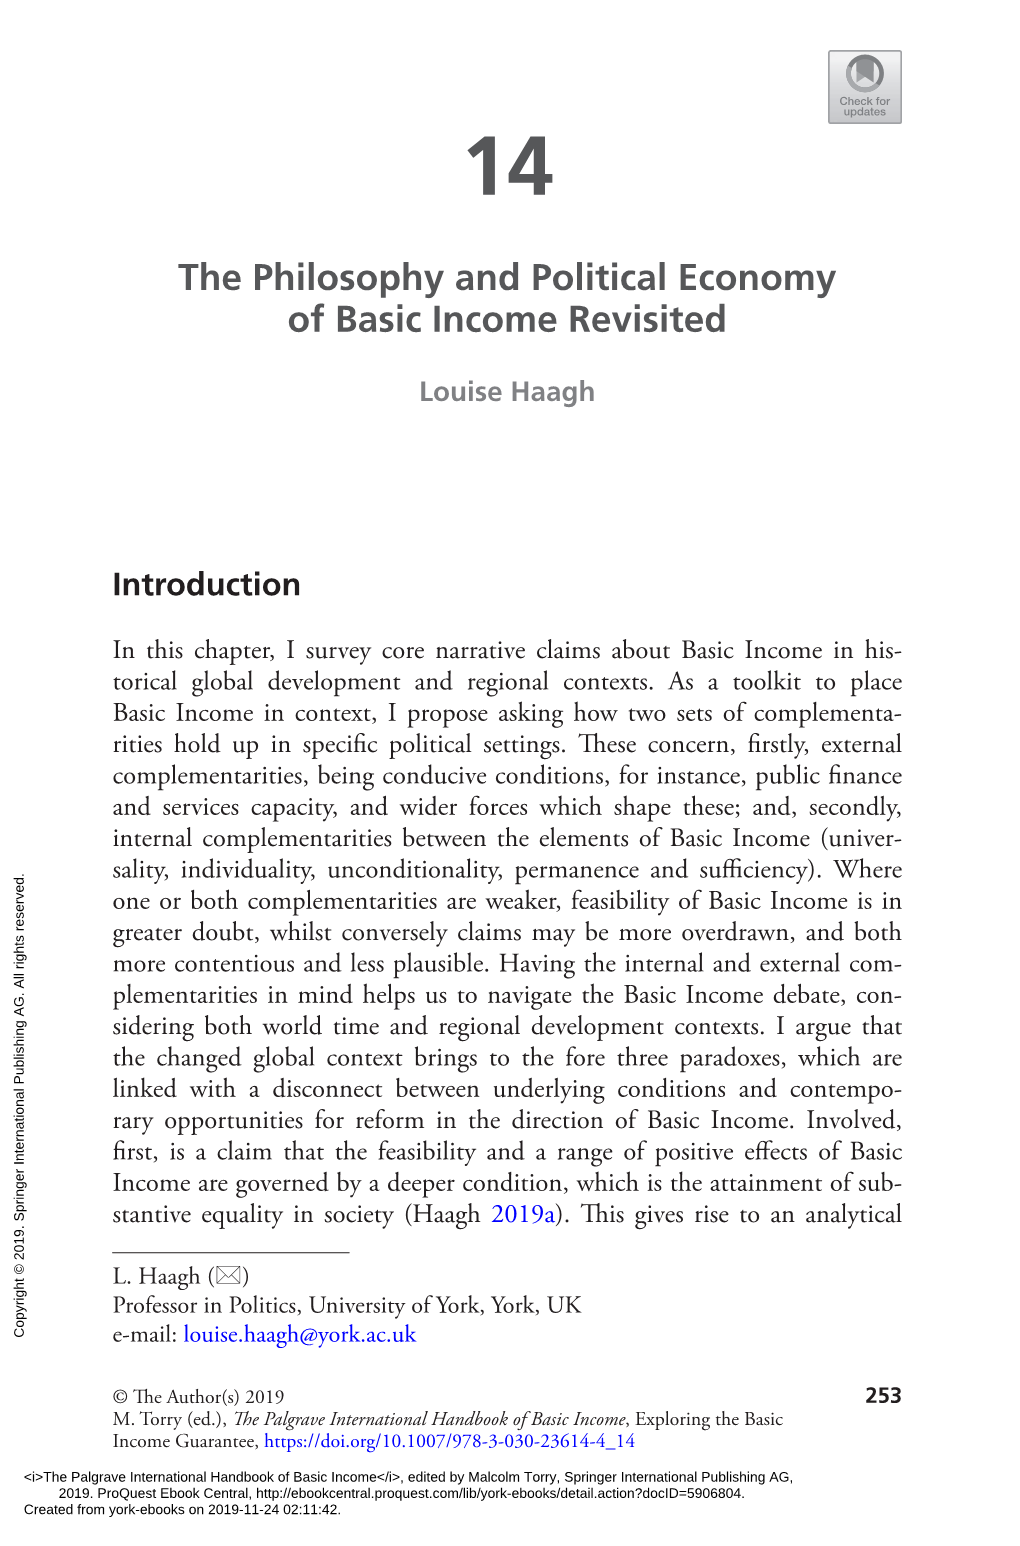 The Philosophy and Political Economy of Basic Income Revisited